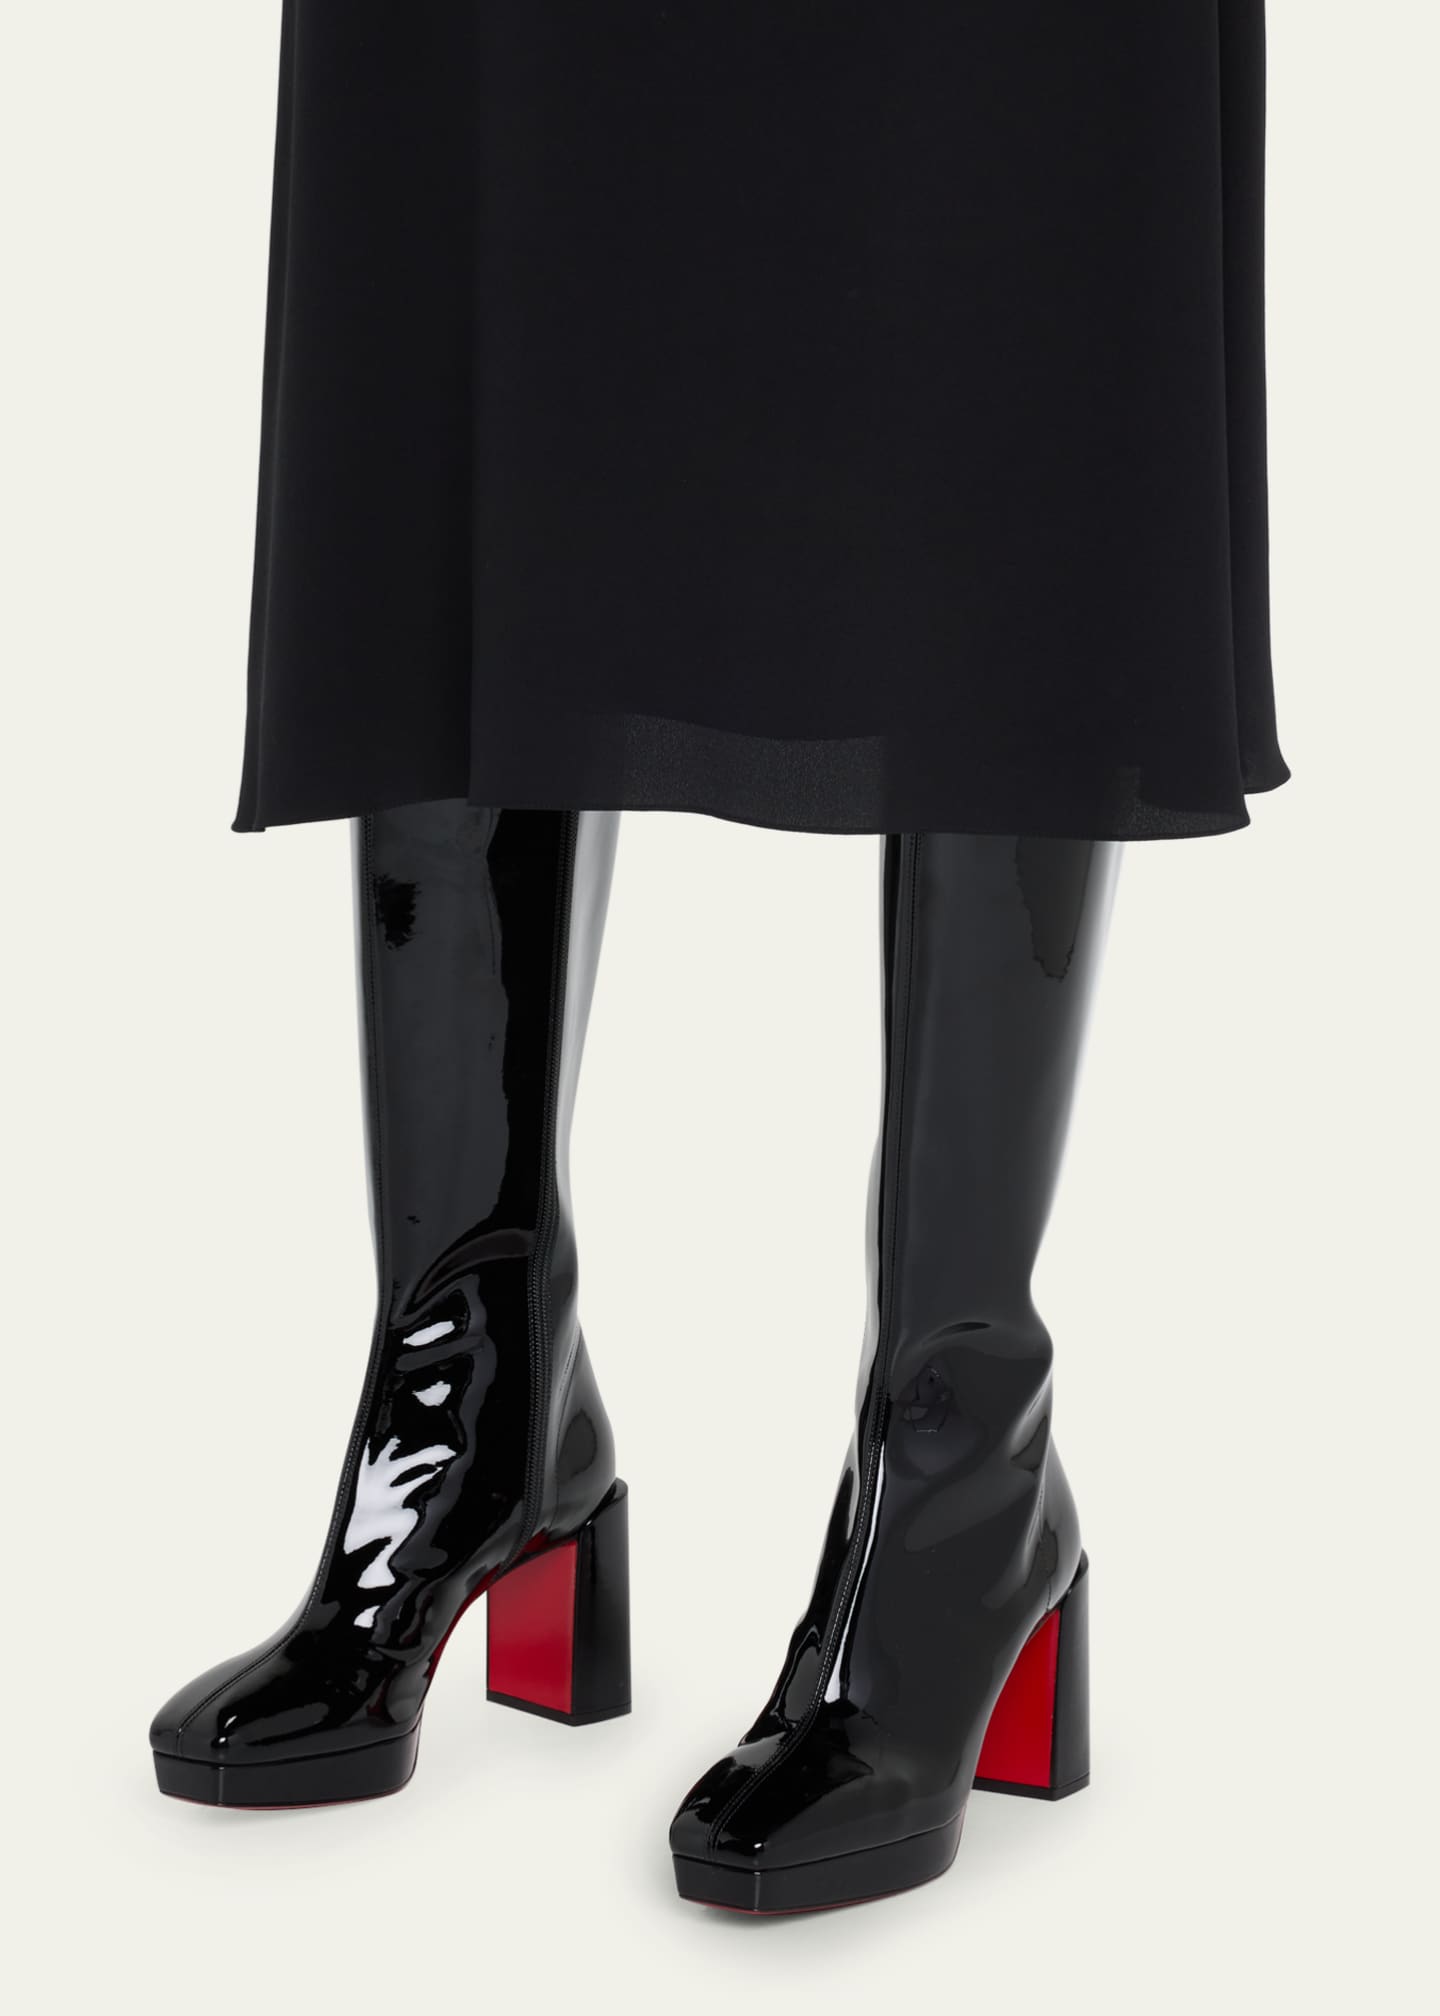 Frenchissima Alta Over-The-Knee Patent Leather Boots  Christian louboutin  shoes, Patent leather boots, Boots